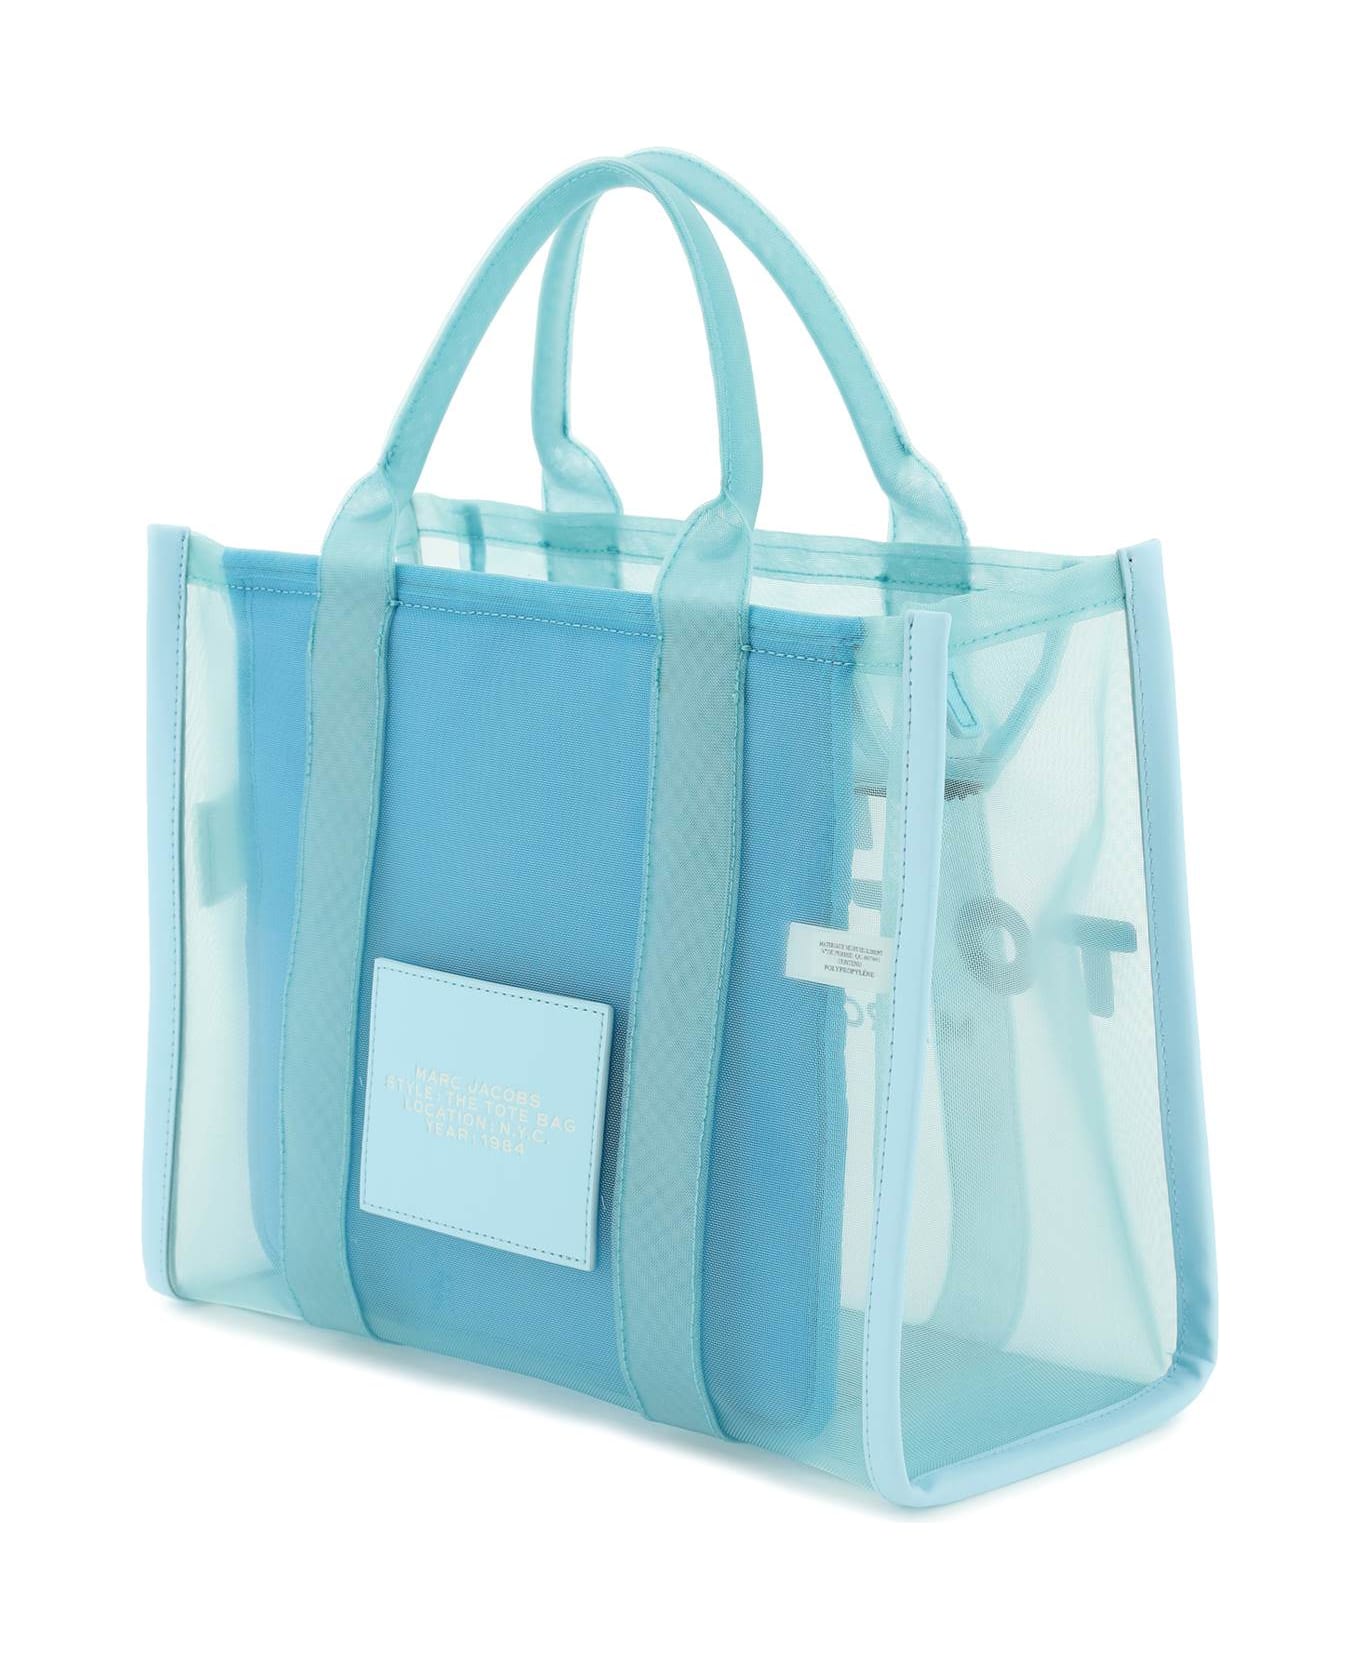 Marc Jacobs The Mesh Small Tote Bag - Pale blue